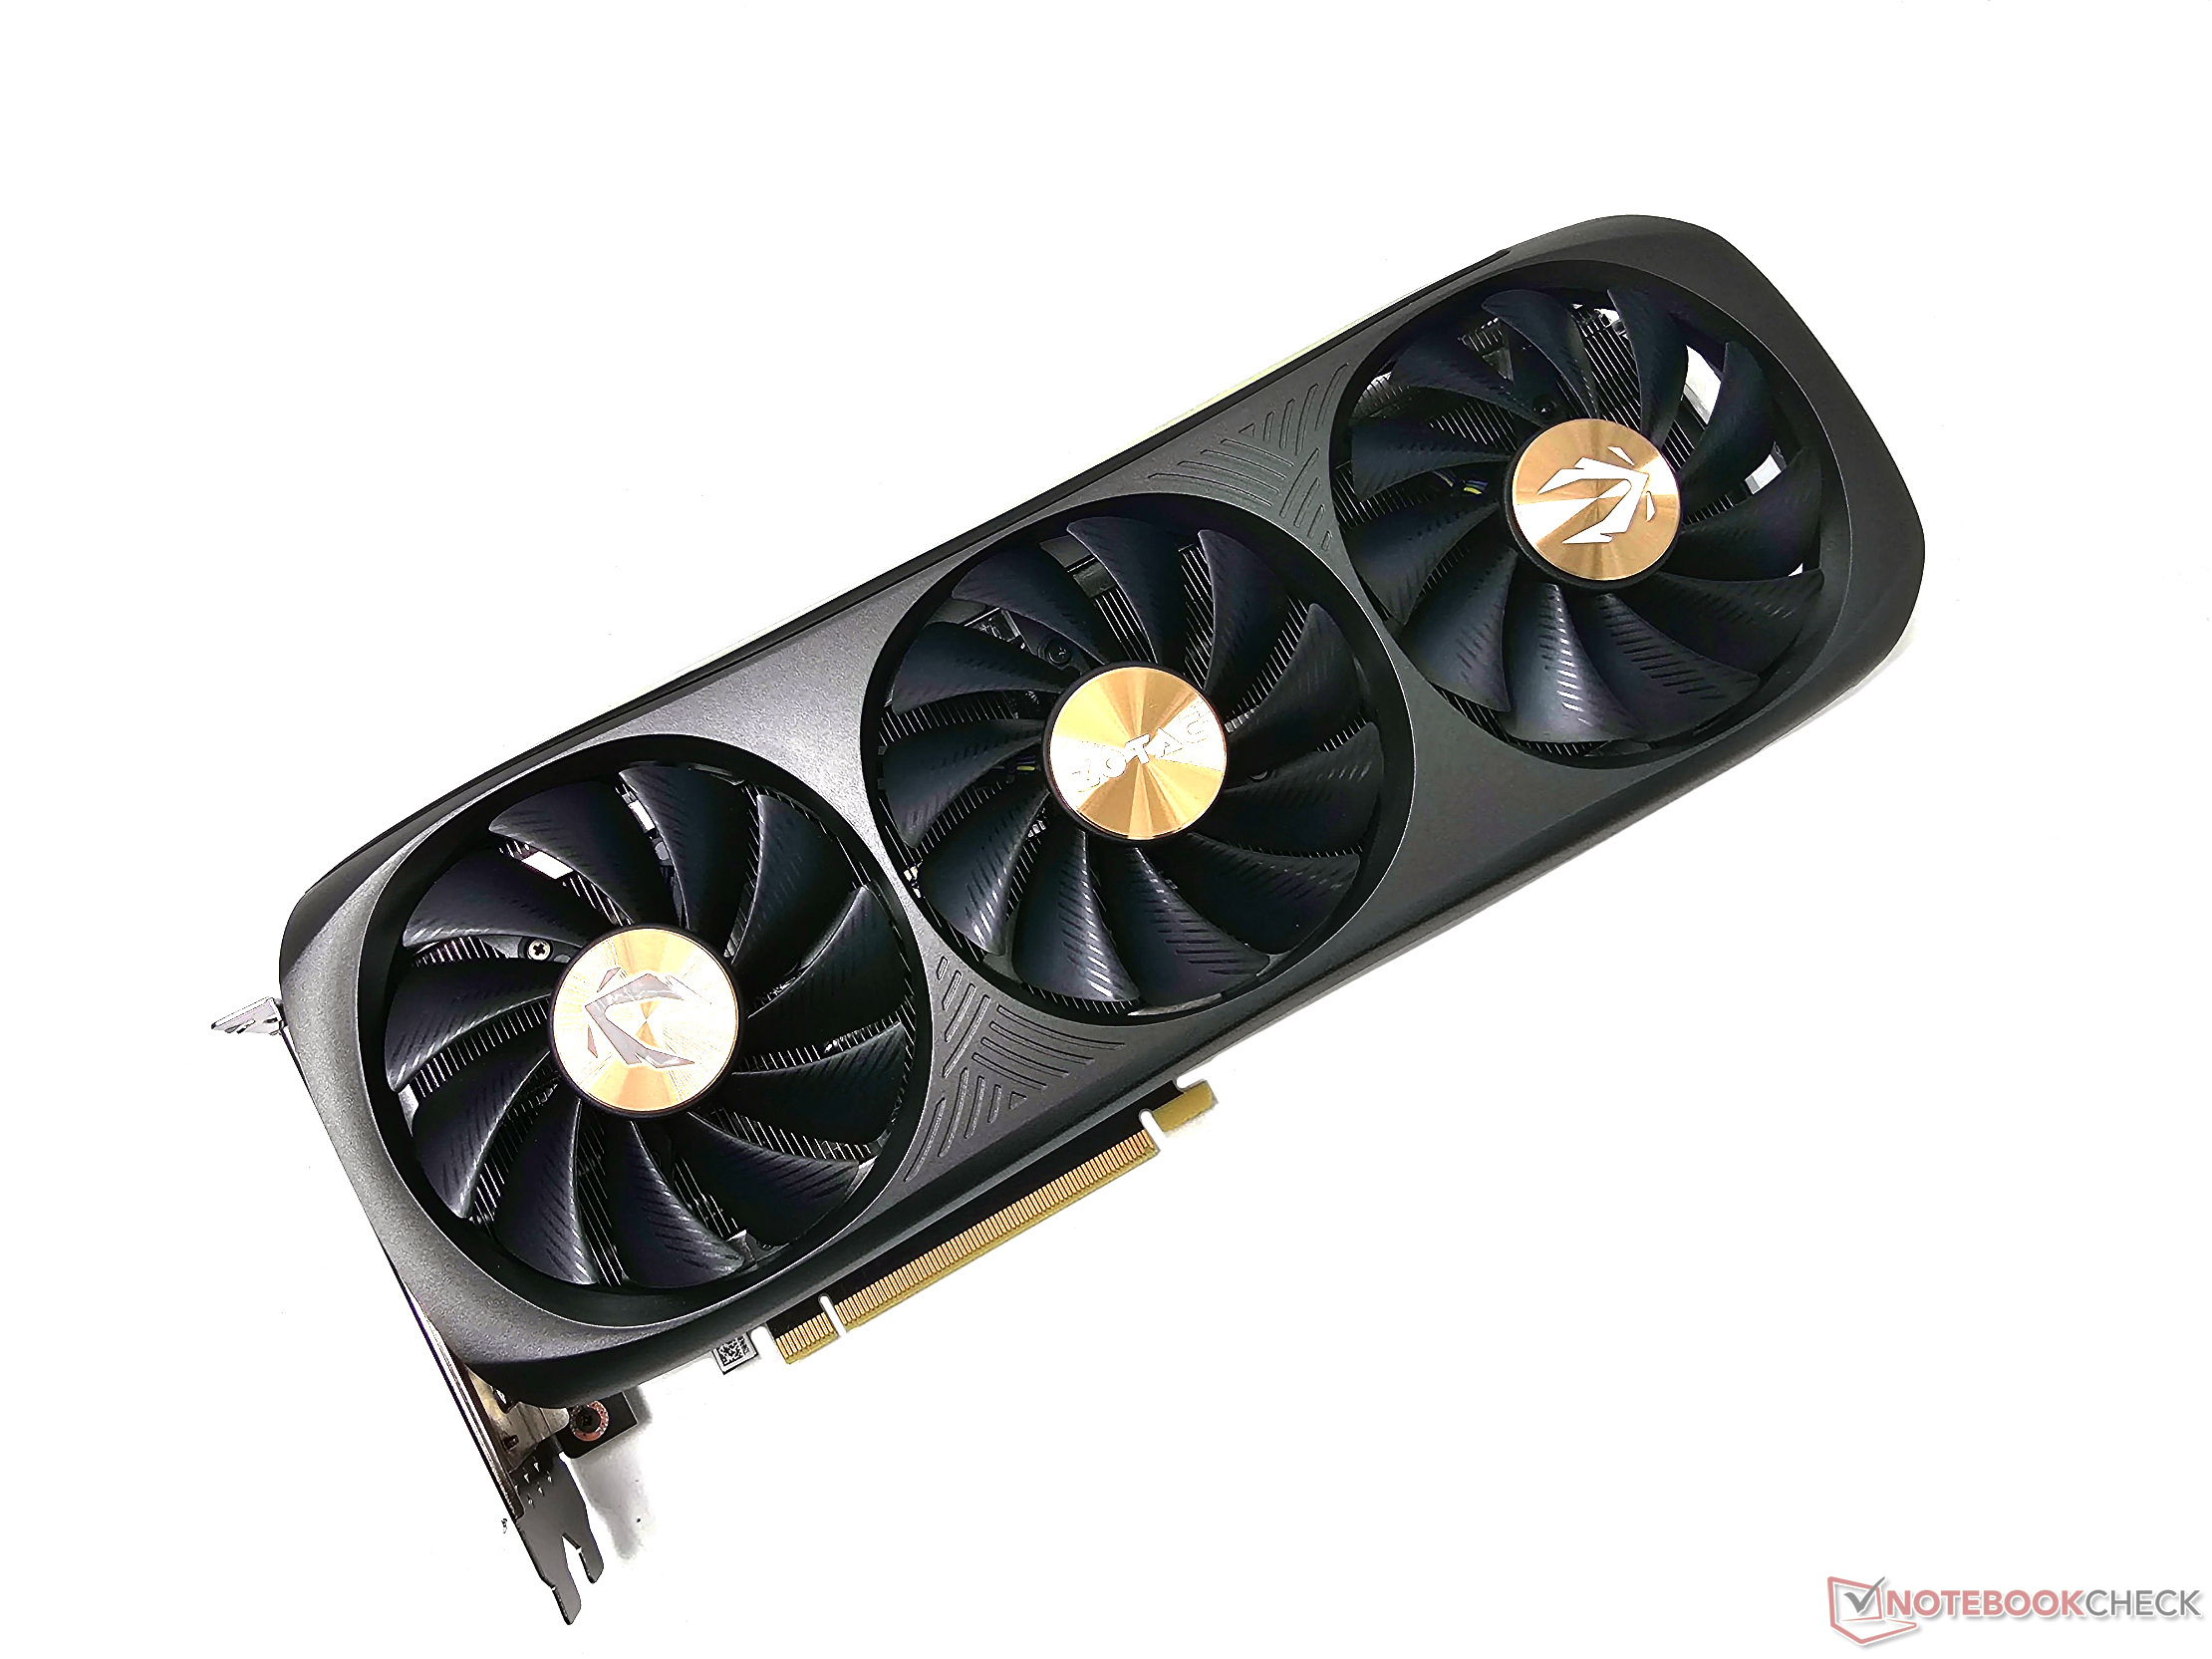 16GB Variant of GeForce RTX 4060 Ti Launches July 18